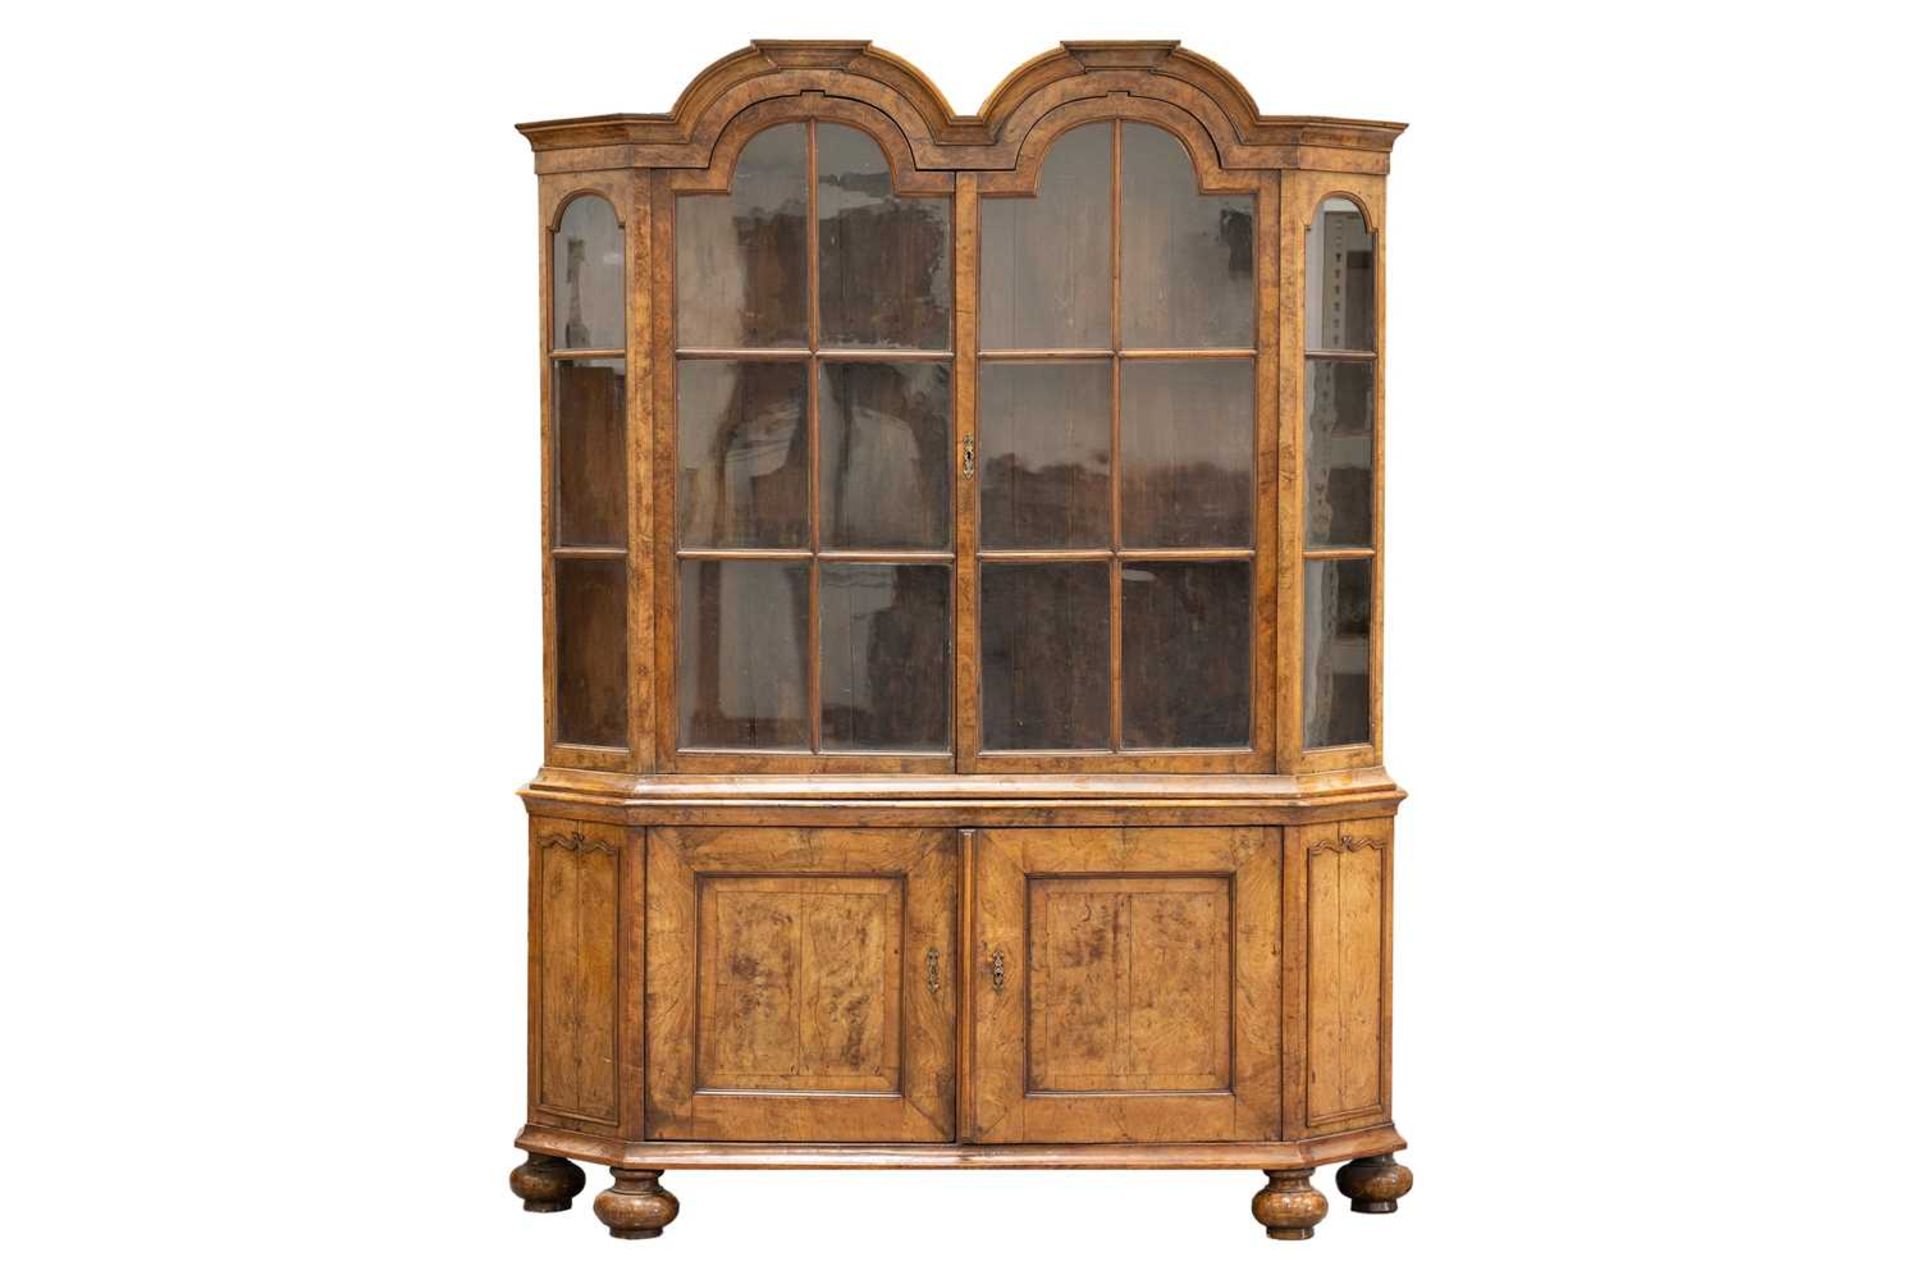 An early 18th-century style figured walnut double domed Dutch "Delft" canted display cabinet, early 